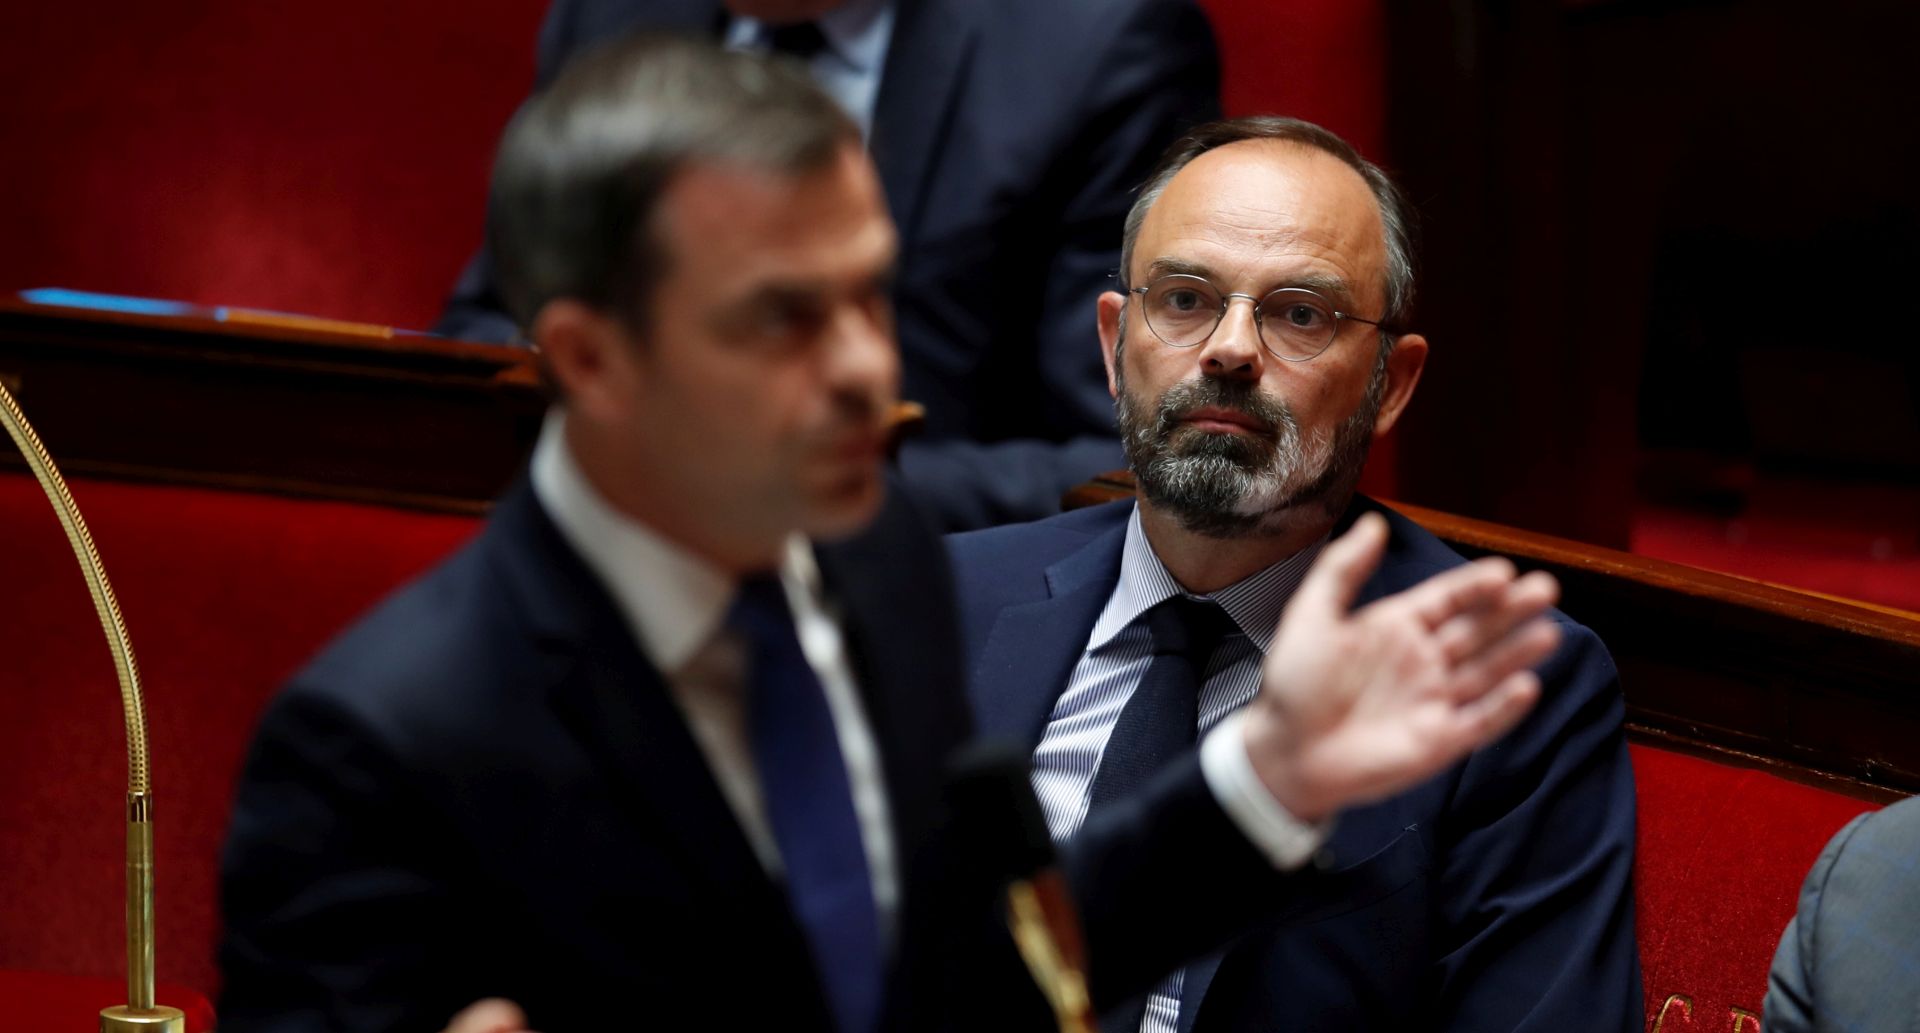 epa08416985 French Prime Minister Edouard Philippe (R) listens to the speech of French Health and Solidarity Minister Olivier during the questions to the government session at the National Assembly as France softens its strict lockdown rules during the outbreak of the coronavirus disease (COVID-19) in Paris, France, 12 May 2020.  EPA/GONZALO FUENTES / POOL  MAXPPP OUT